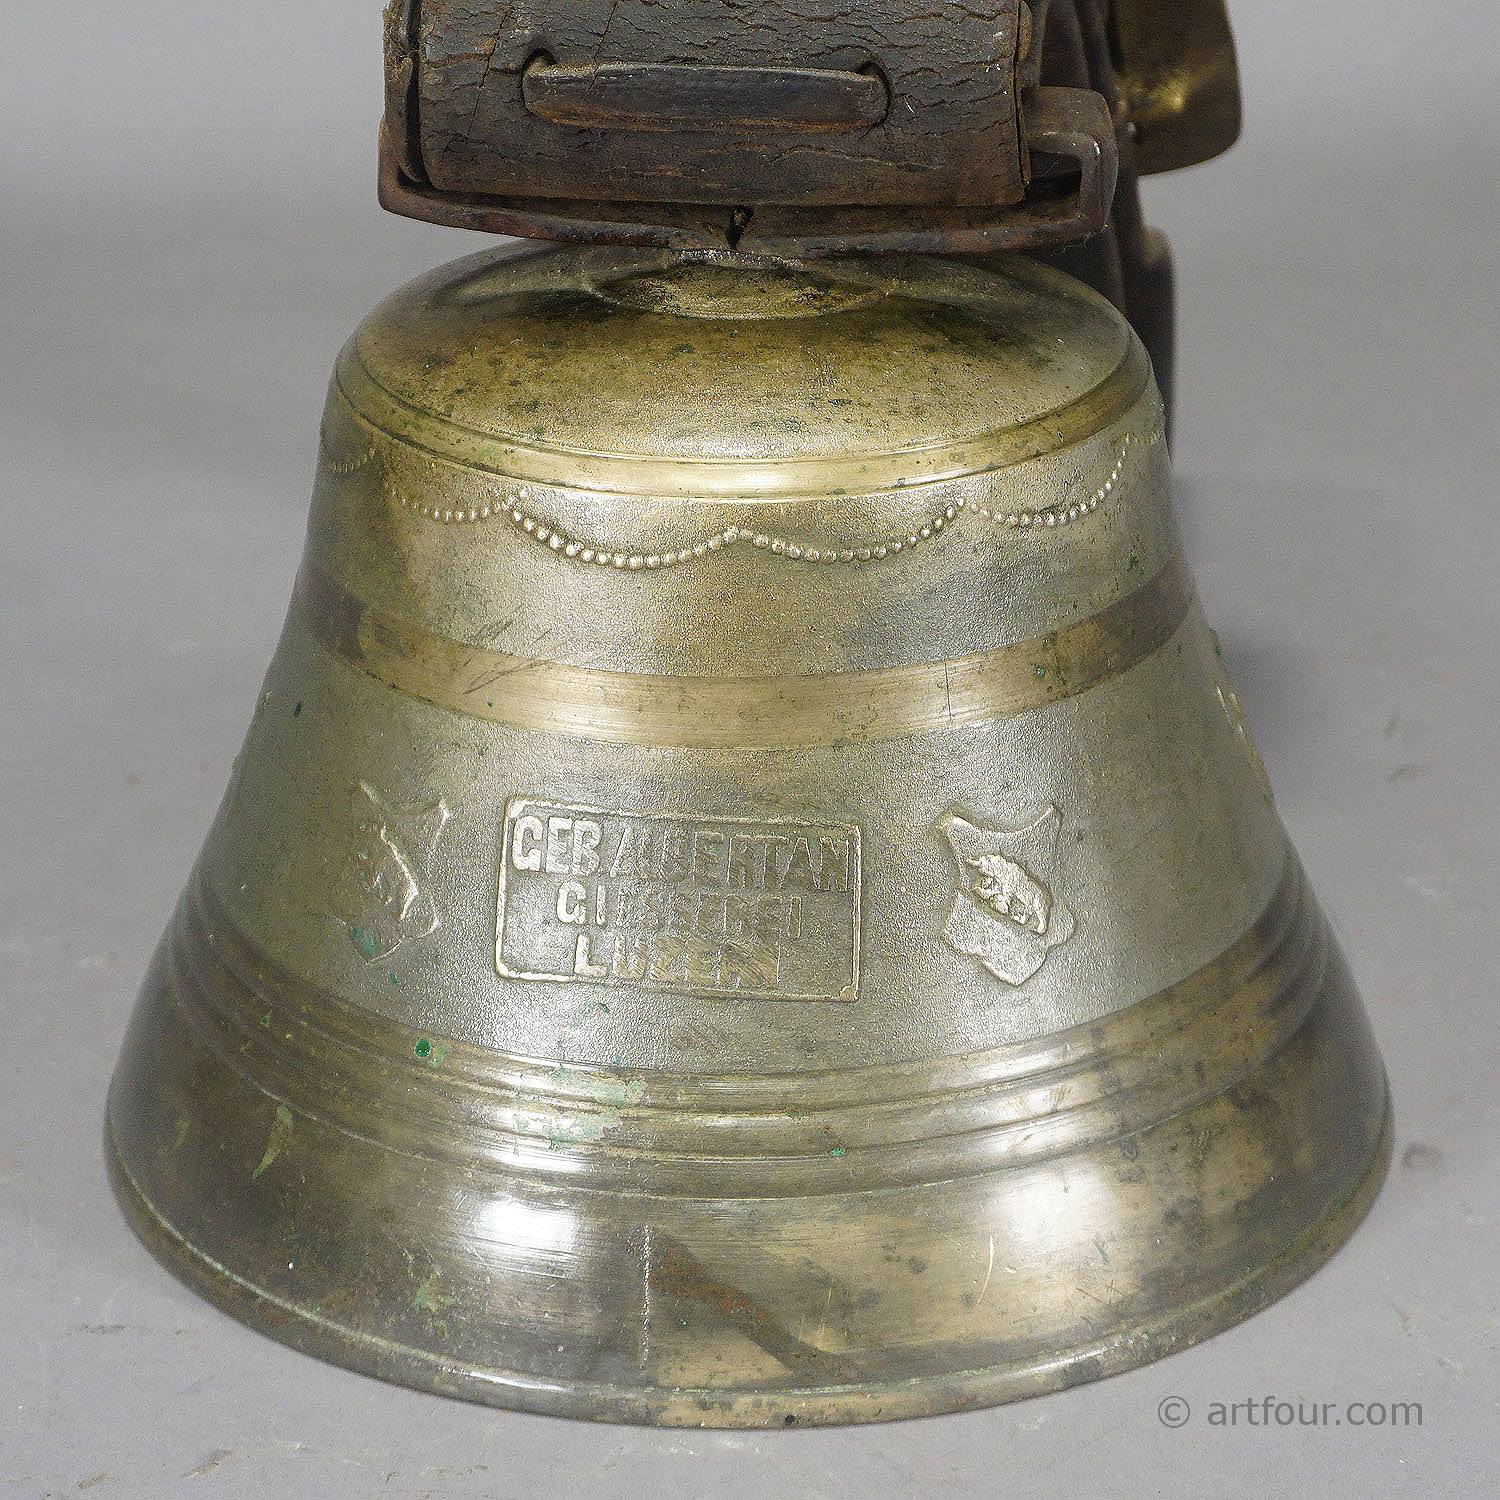 Antique Swiss Casted Bronze Cow Bell with Leather Strap ca. 1900